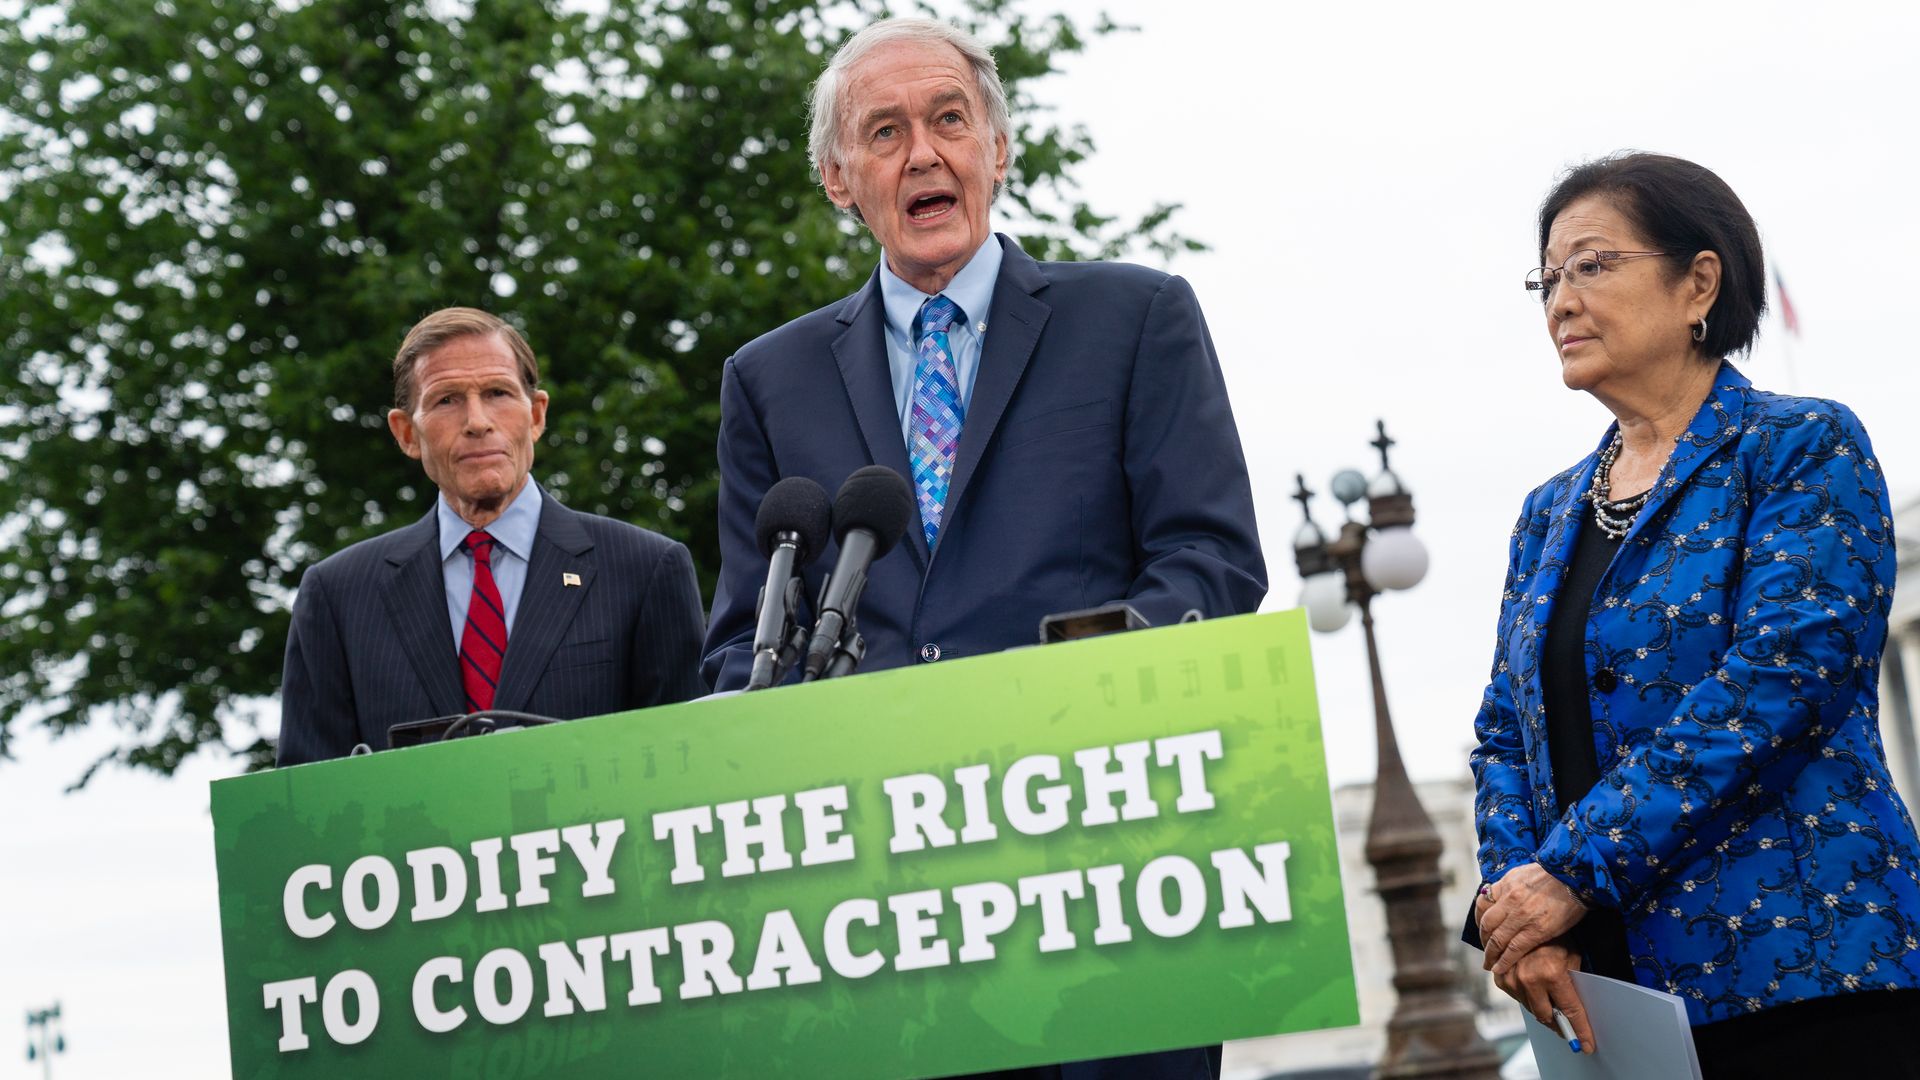 Picture of Ed Markey in front of a sign that says "codify the right to contraception"